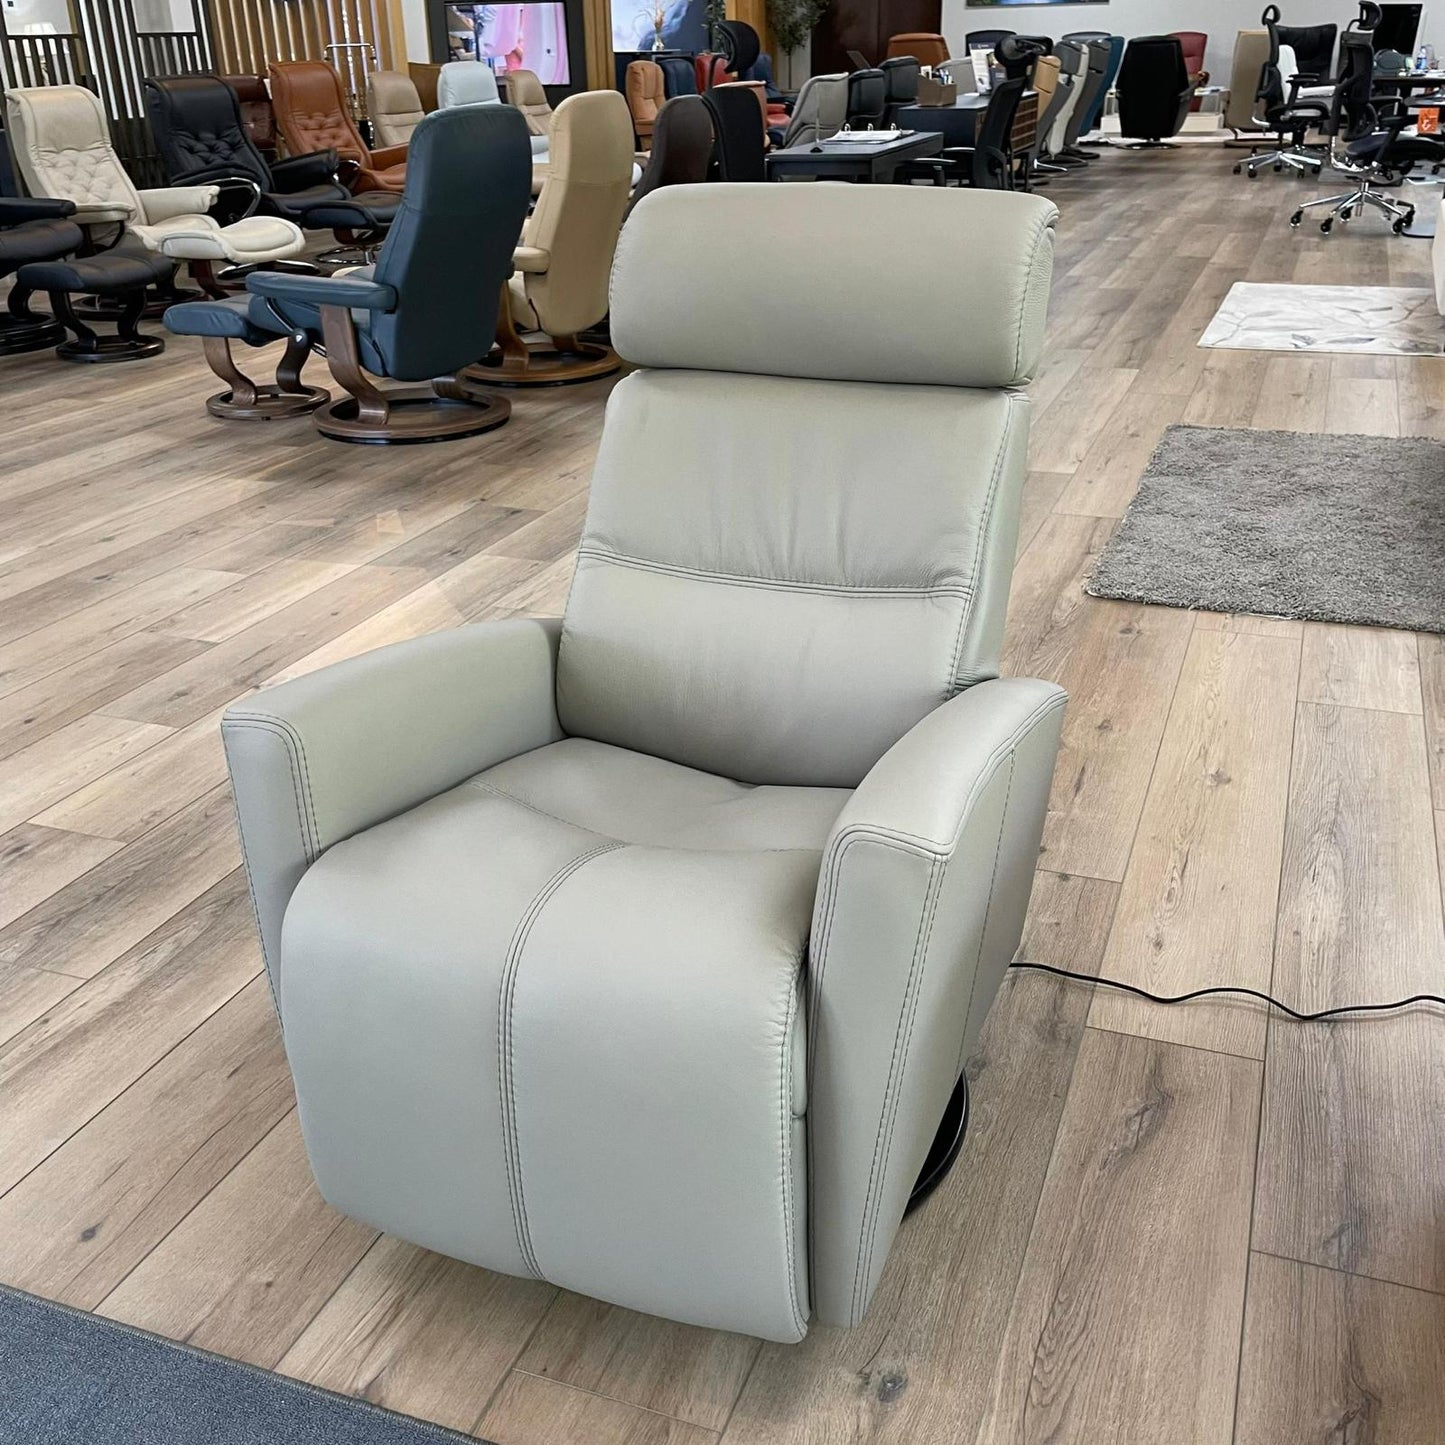 Fjords Milan - Small Size - (Swivel / Glider Power Recliner)